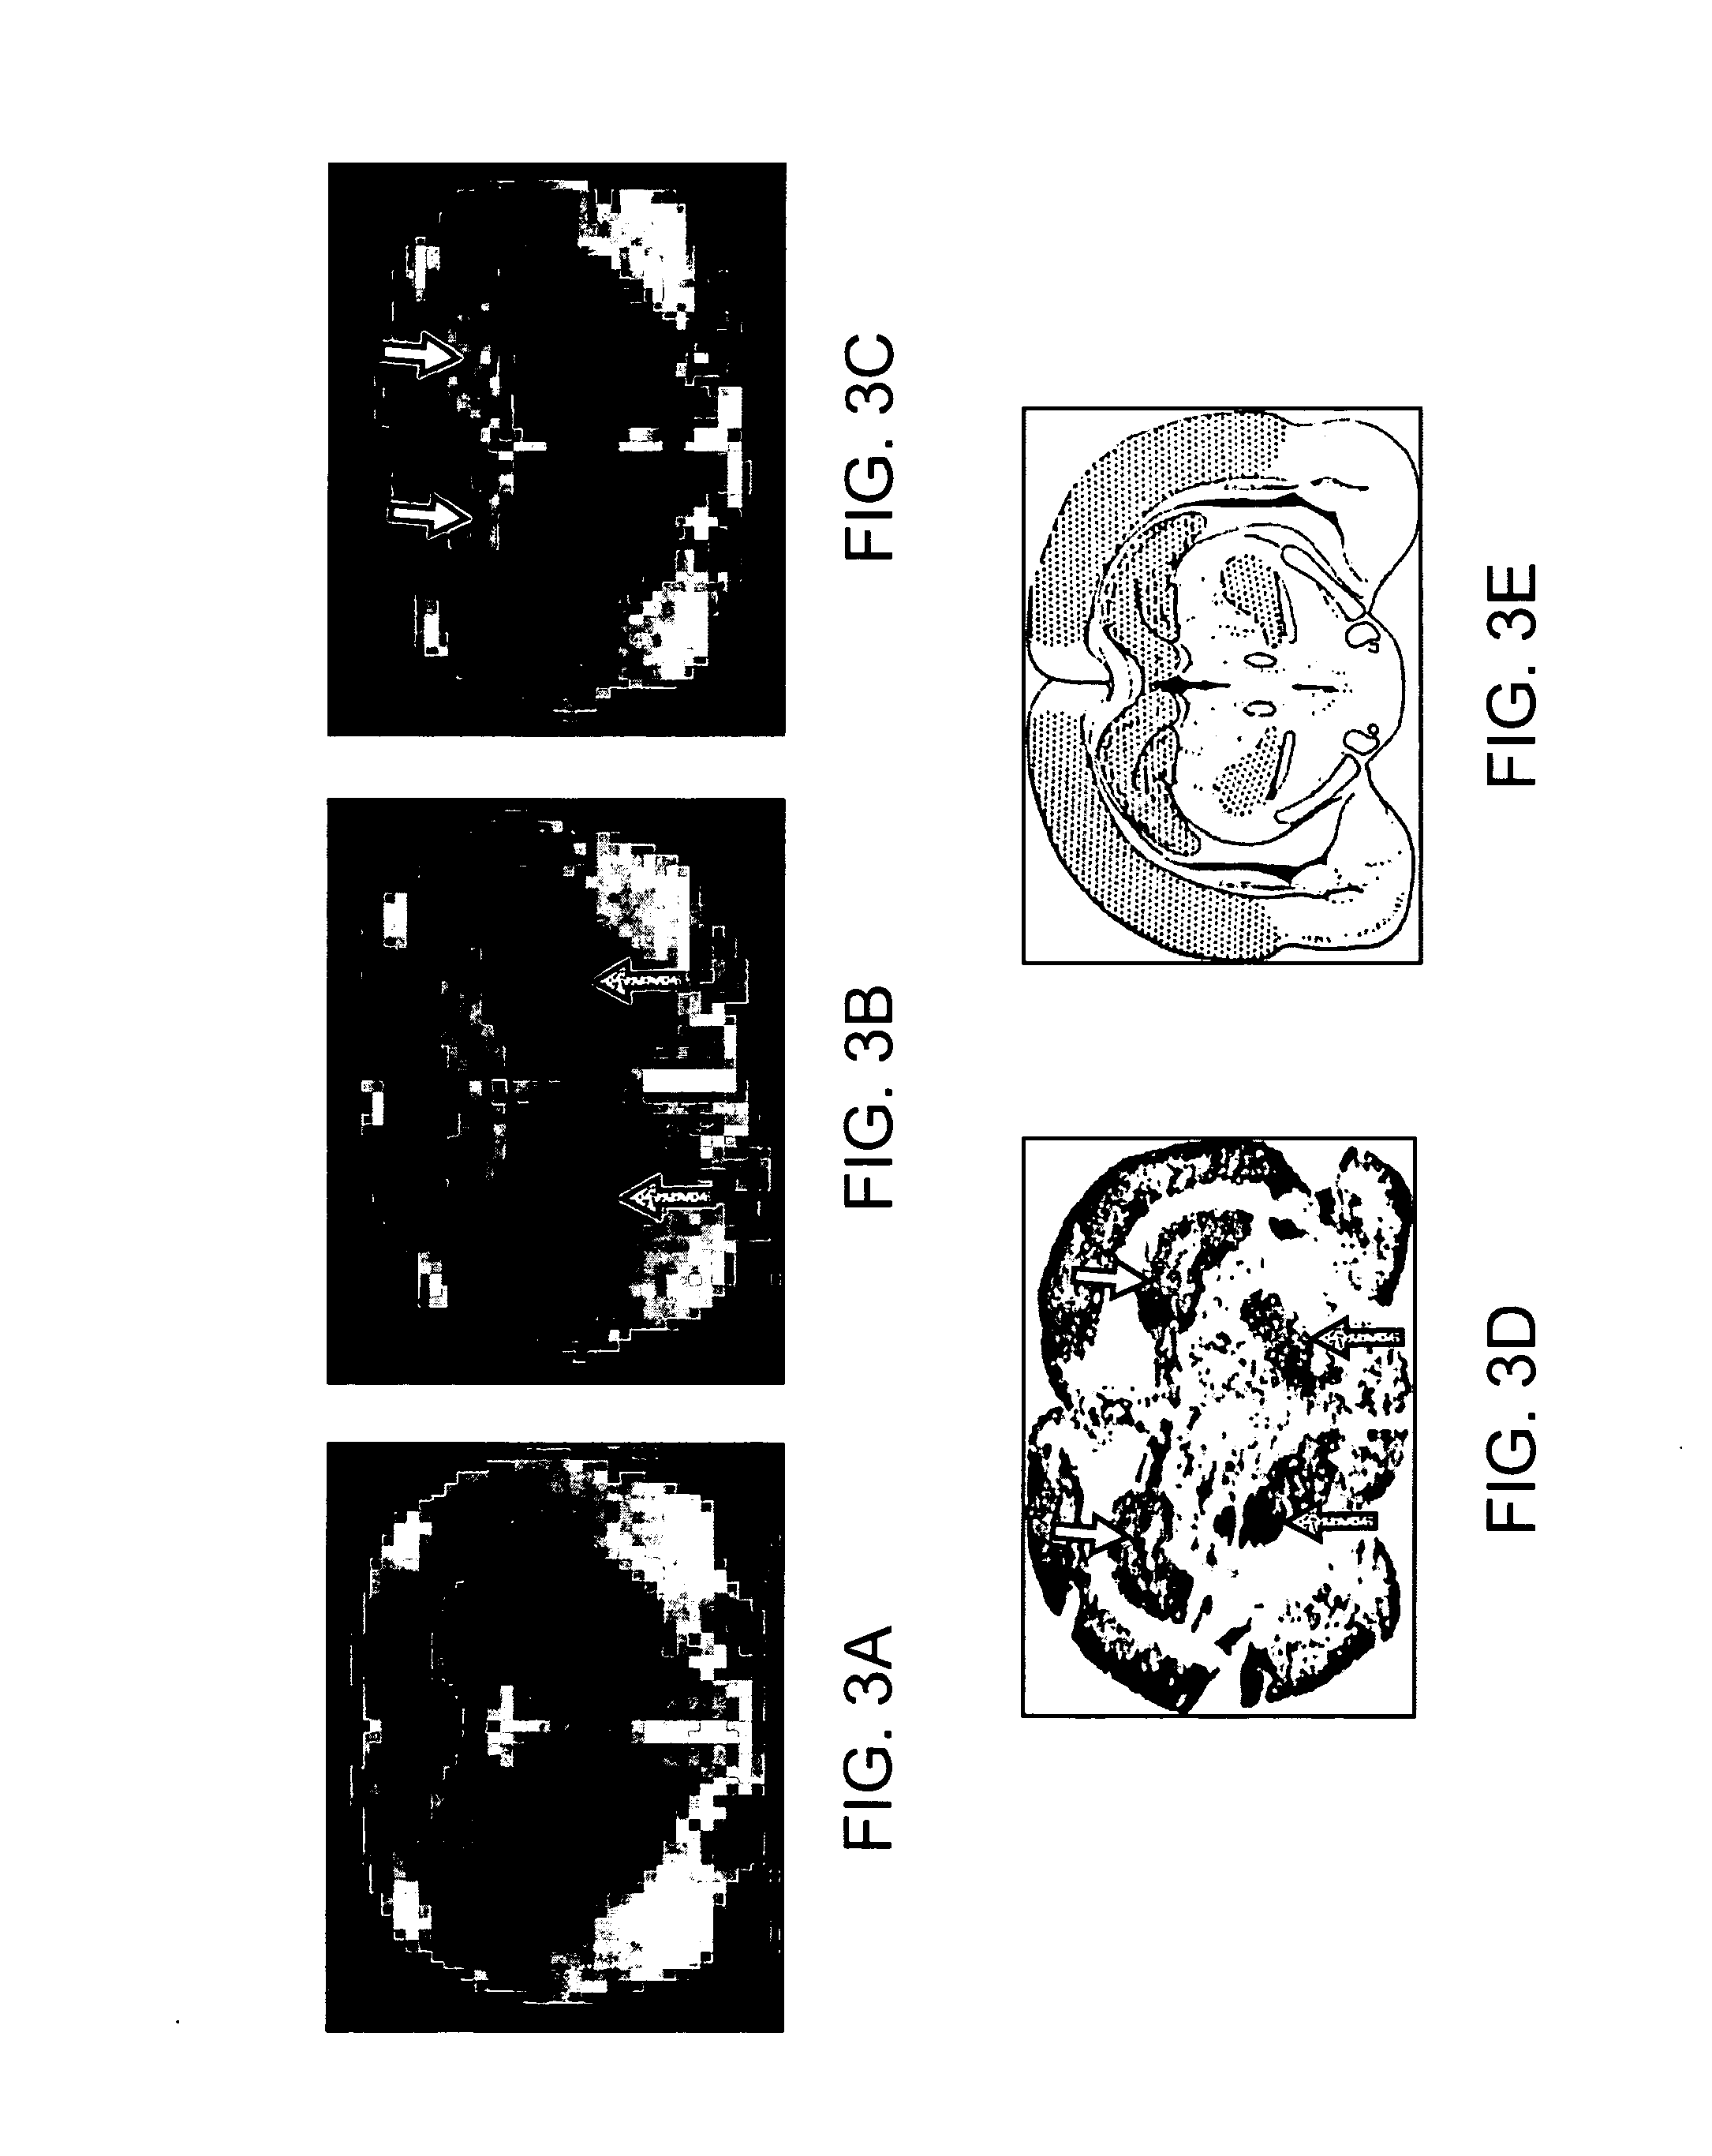 Functionalized magnetic nanoparticles and methods of use thereof